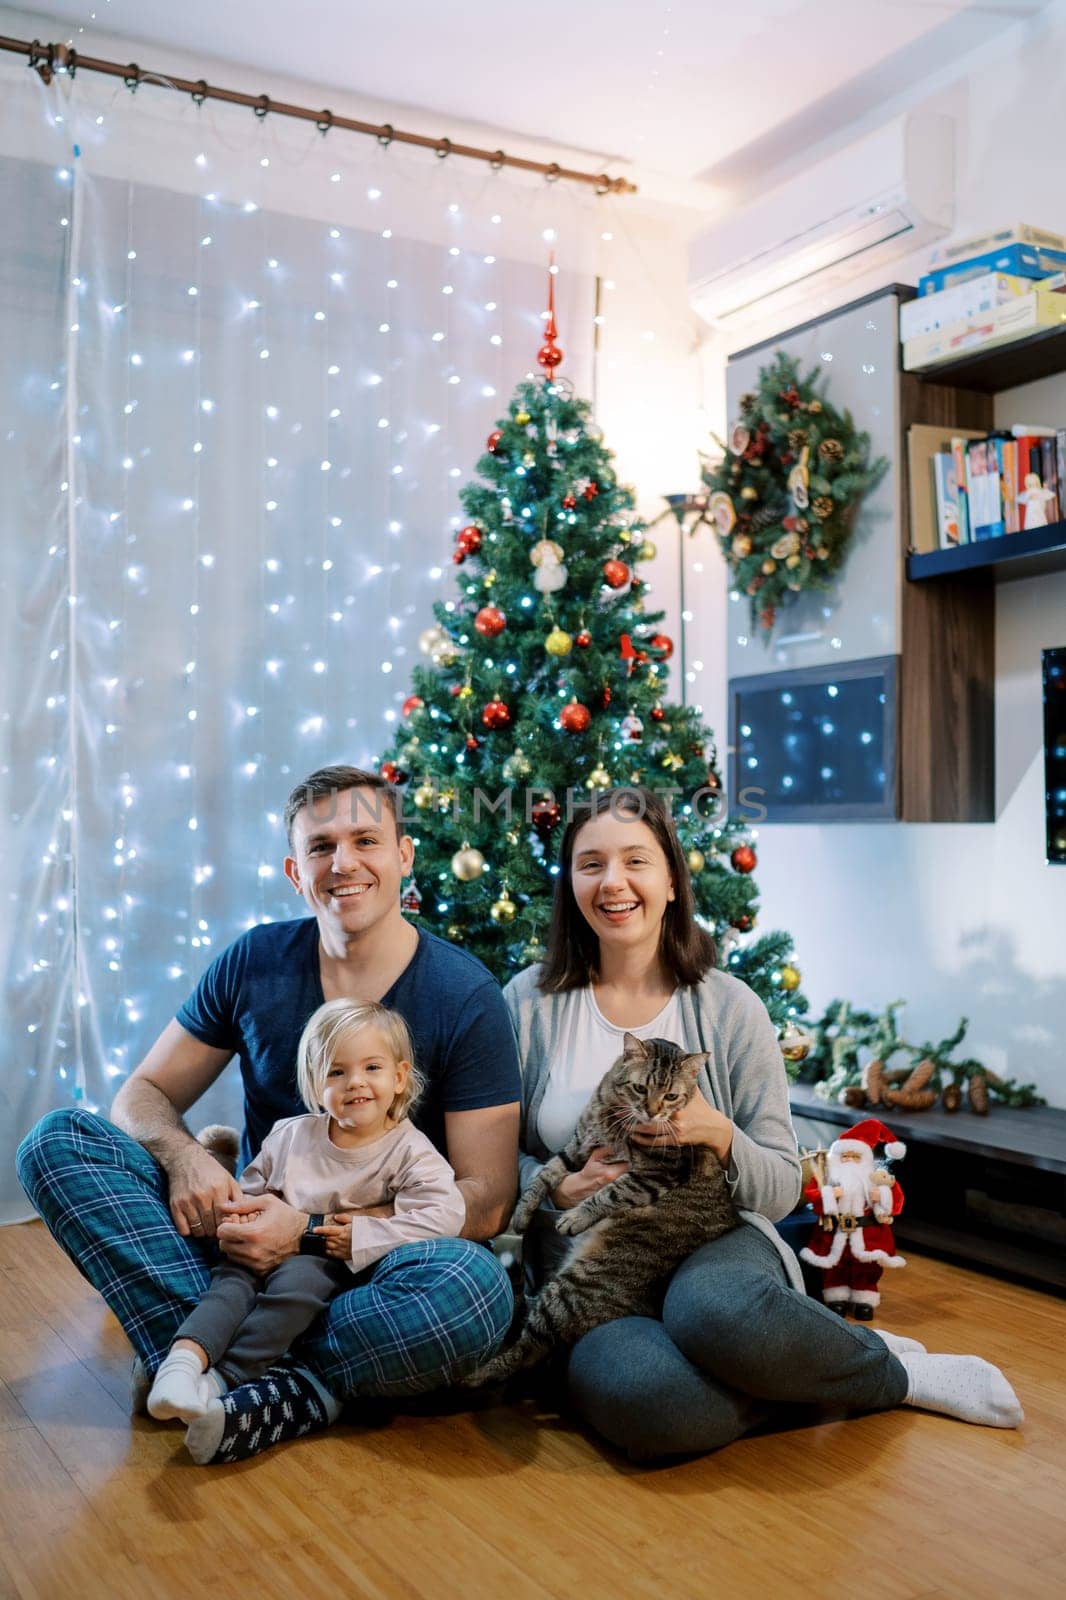 Happy parents with a little girl and a cat sit near the Christmas tree on the floor by Nadtochiy